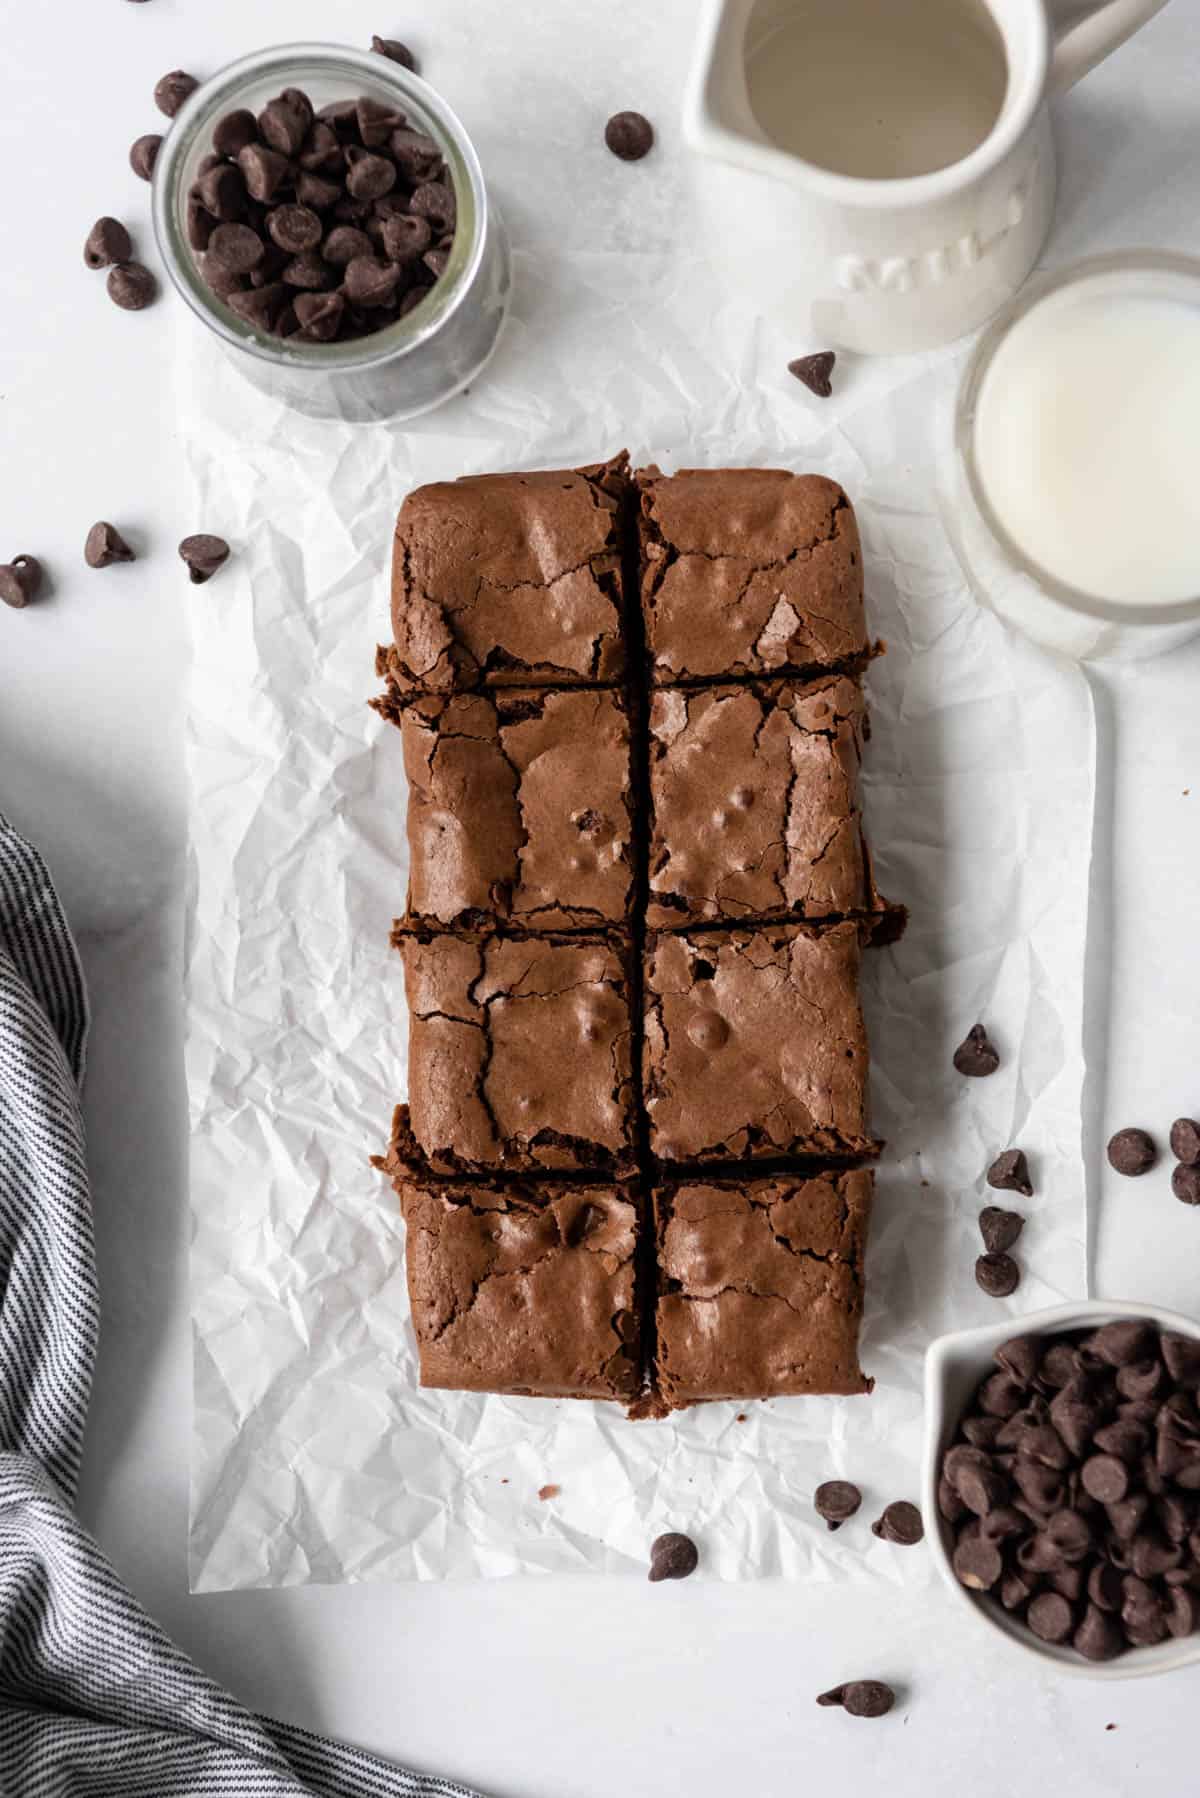 A small batch of chocolate brownies cut into eight small squares next to chocolate chips and a glass of milk.